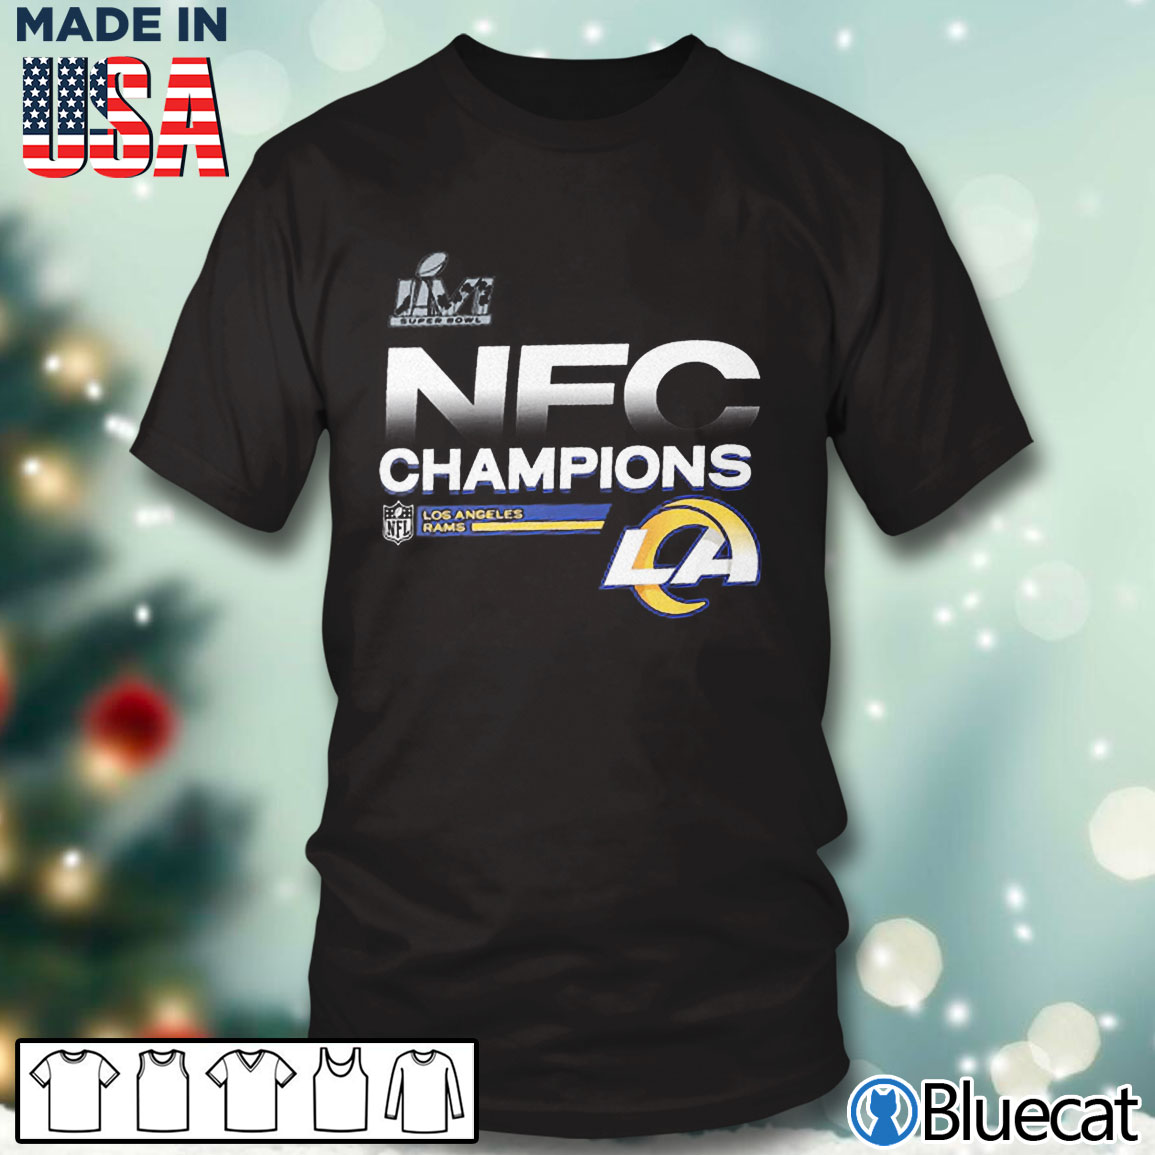 Nike 2021 NFC Champions Trophy Collection (NFL Los Angeles Rams) Men's  Long-Sleeve T-Shirt.